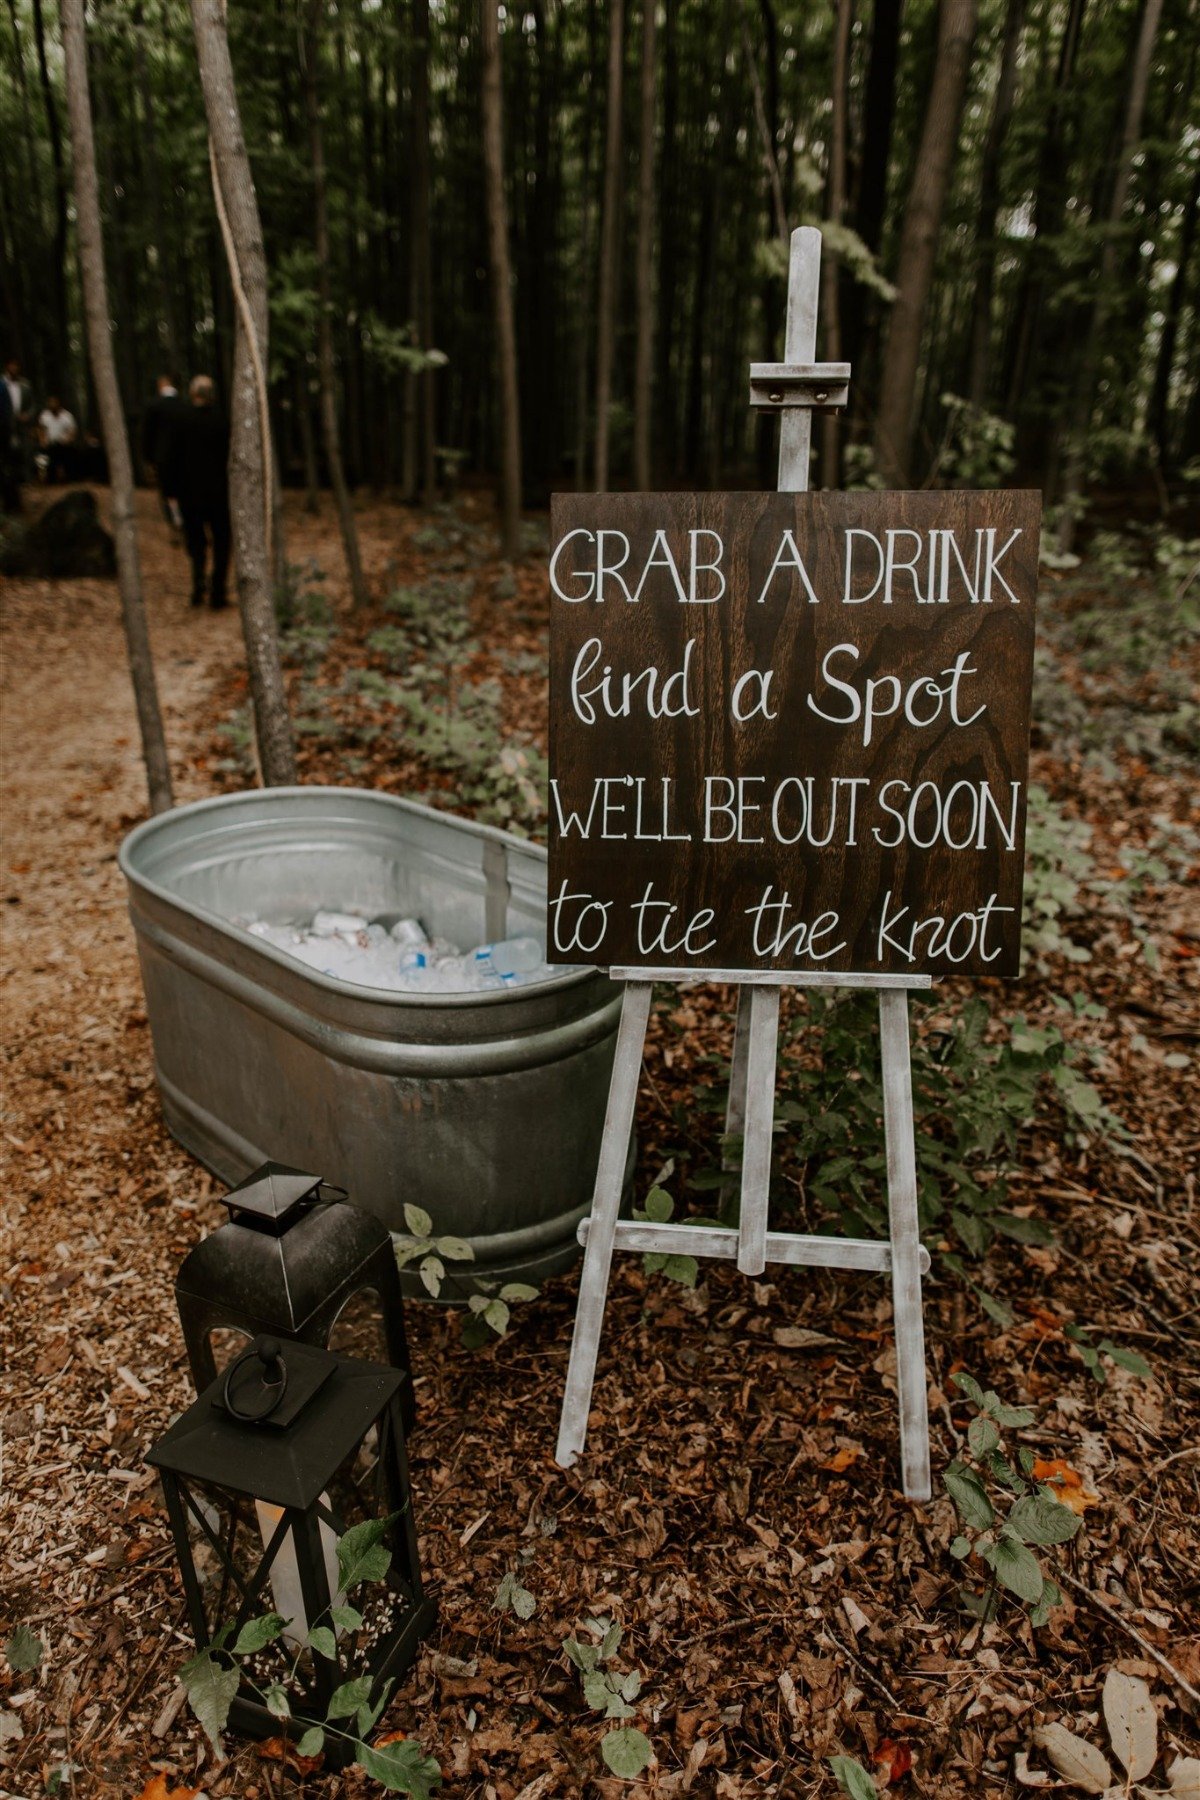 Grab a drink, find a spot we'll be out soon to tie the knot sign